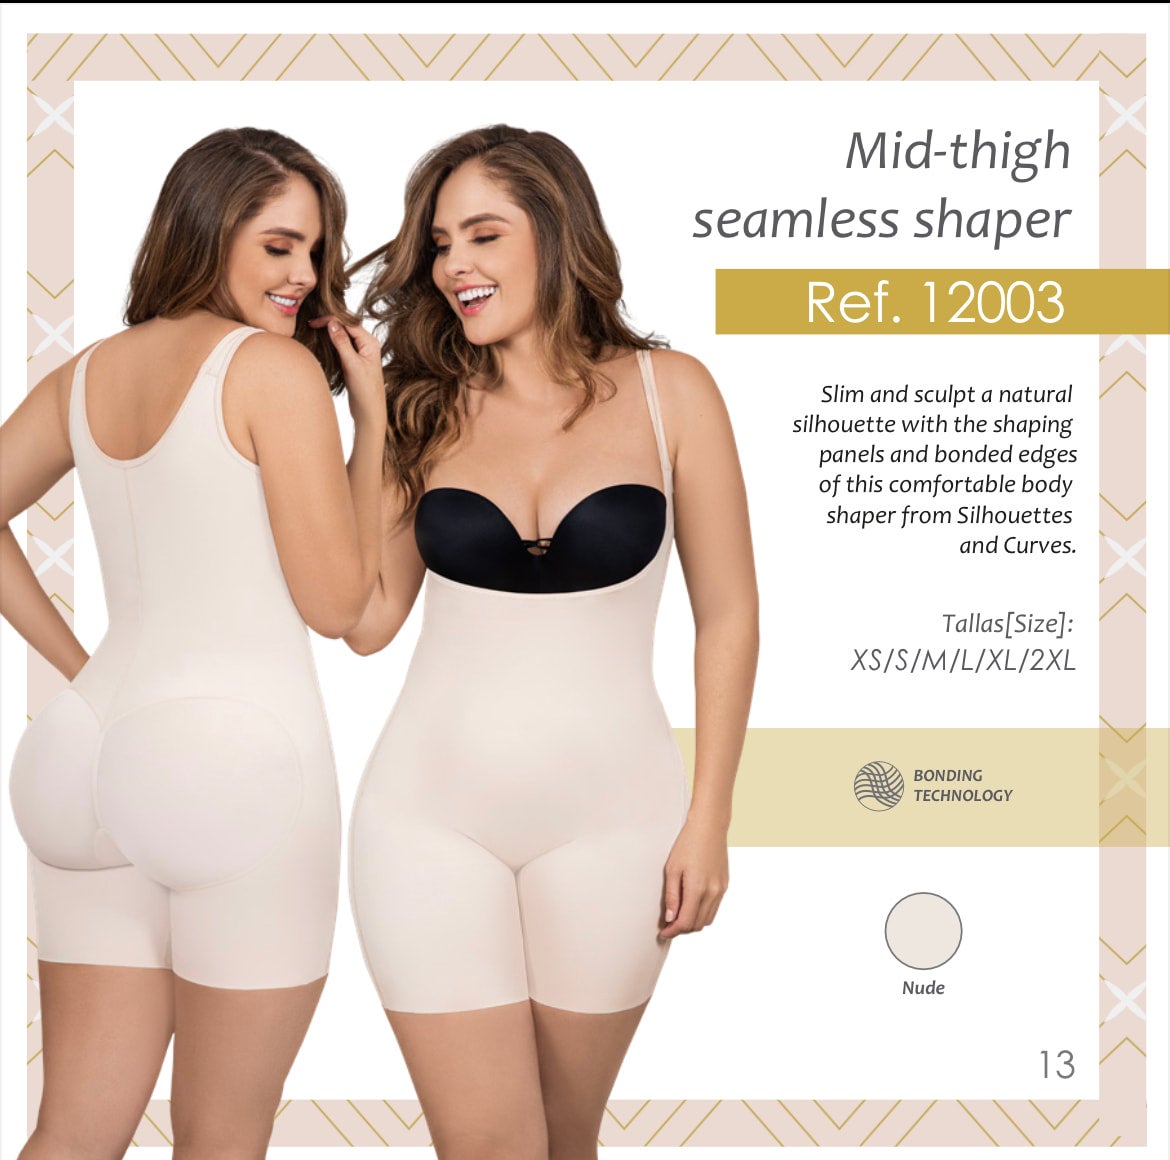 SEAMLESS SHAPER - Silhouettes and Curves